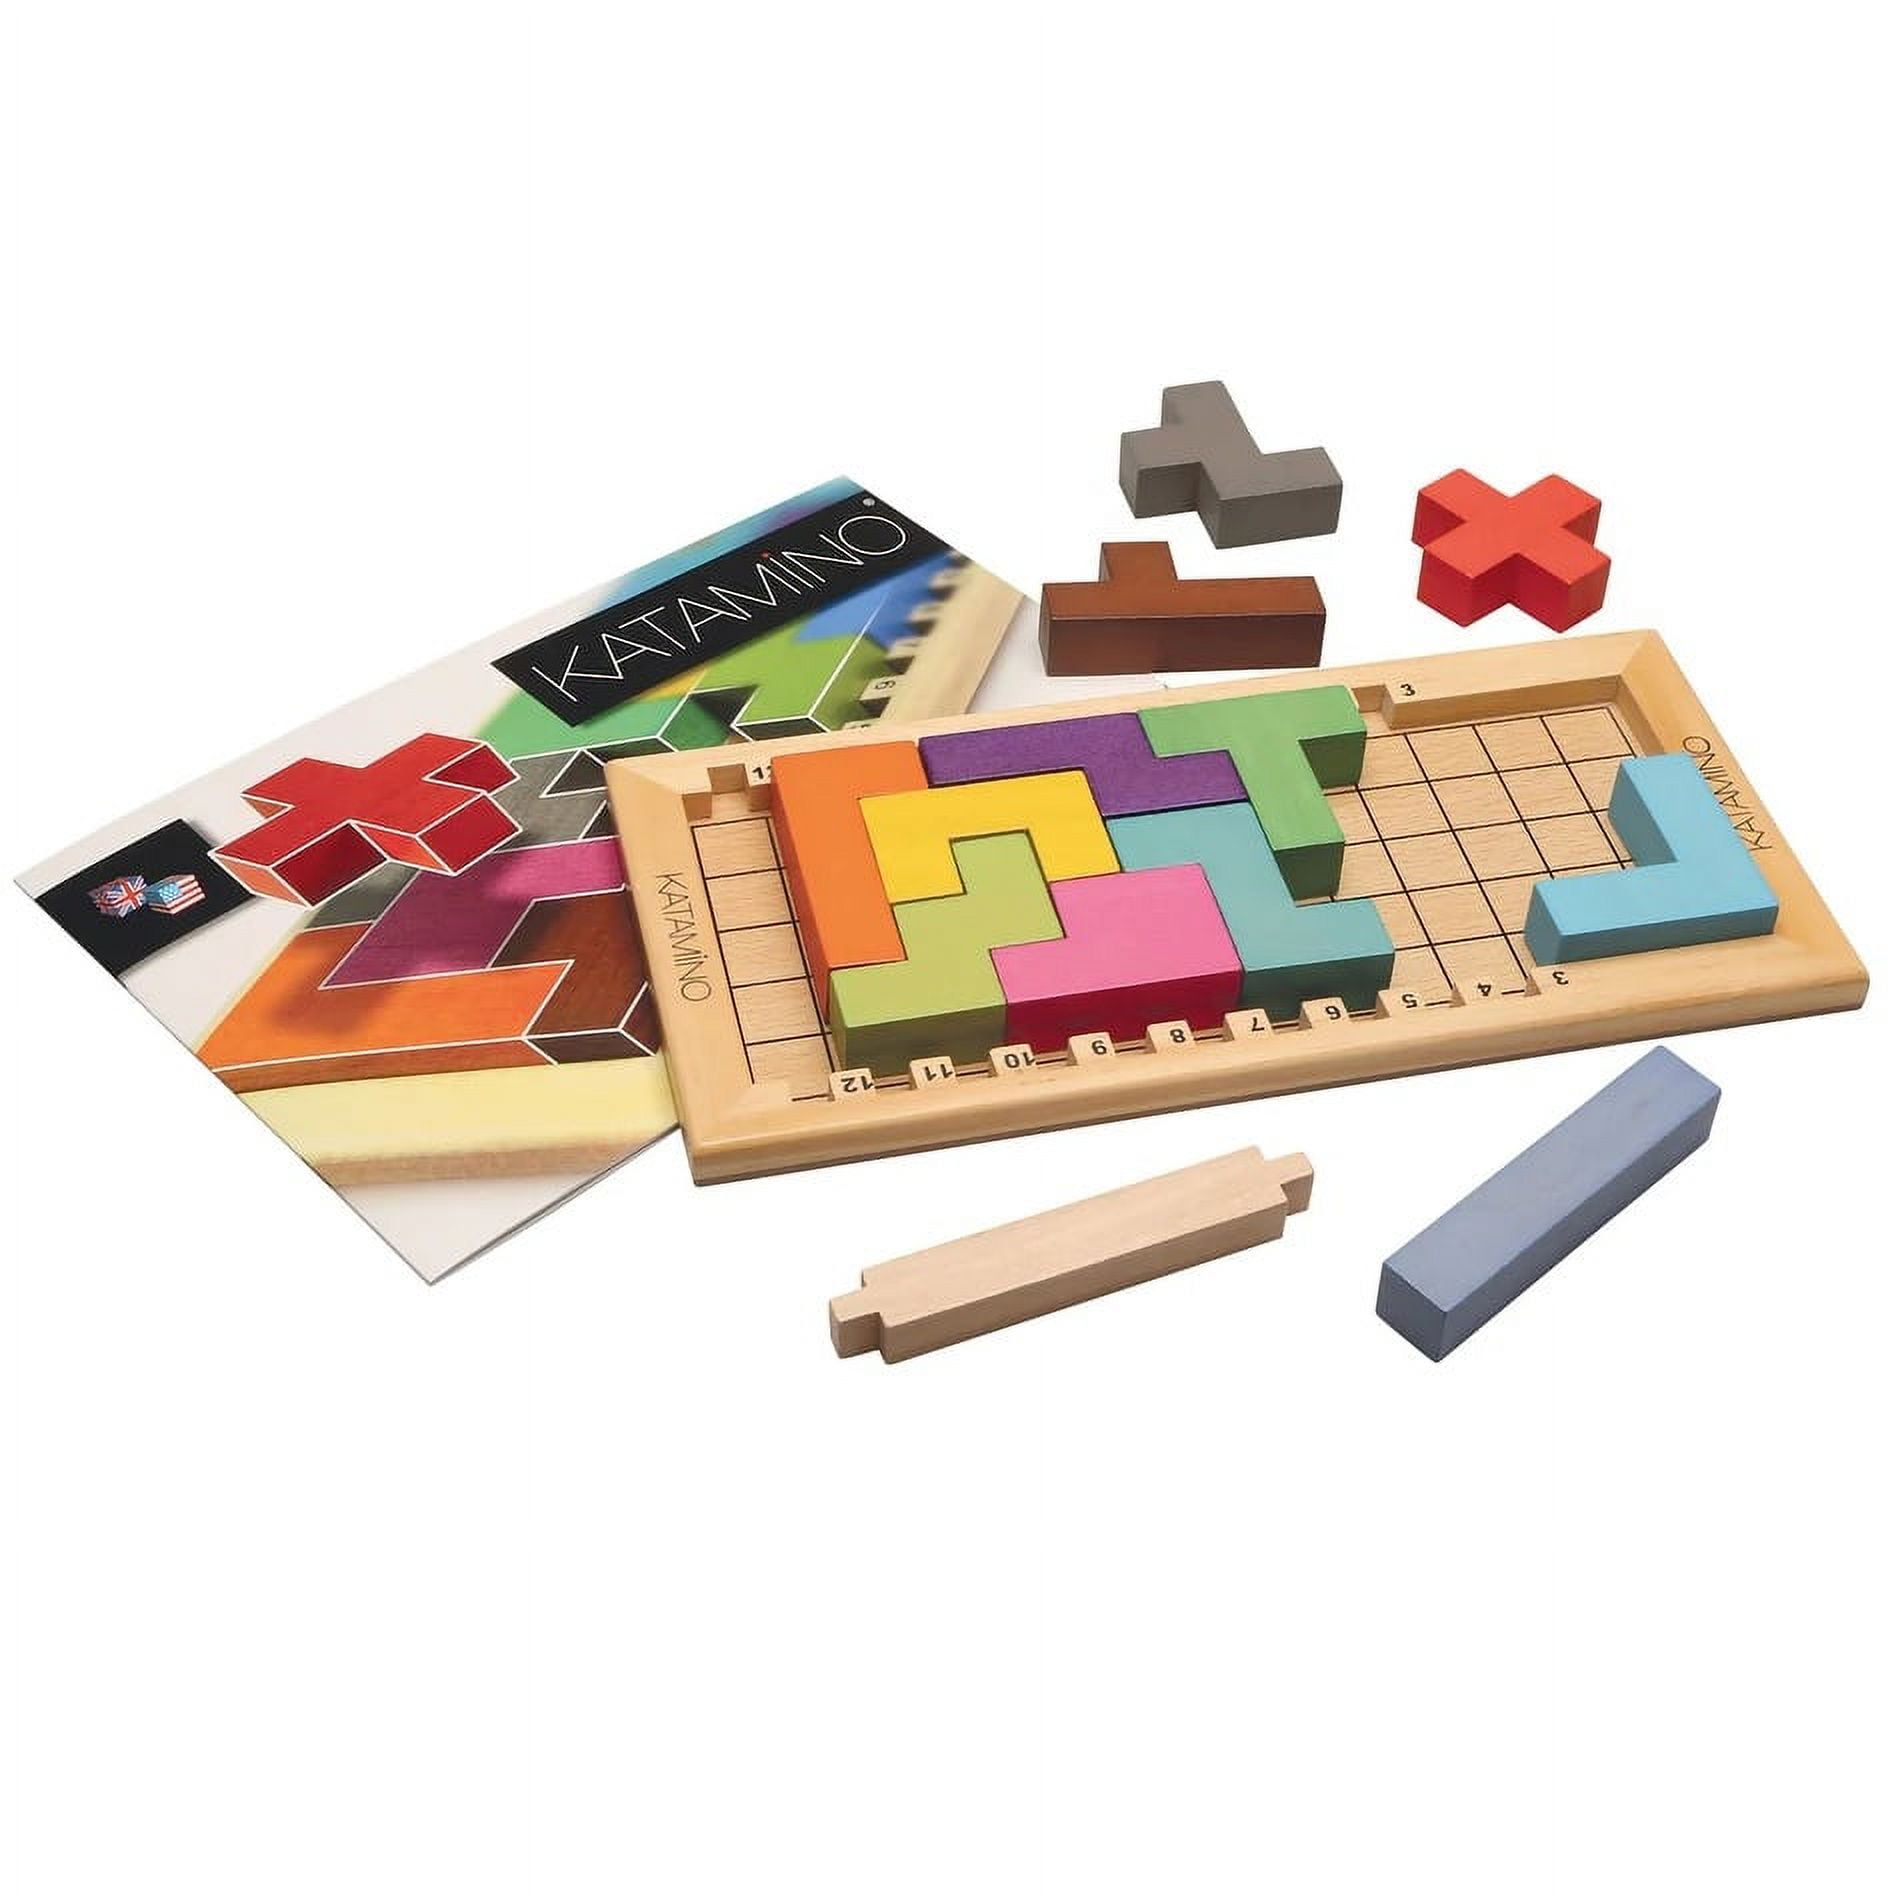 Katamino - Pentominoes Wooden Puzzle and Strategy Game by Gigamic